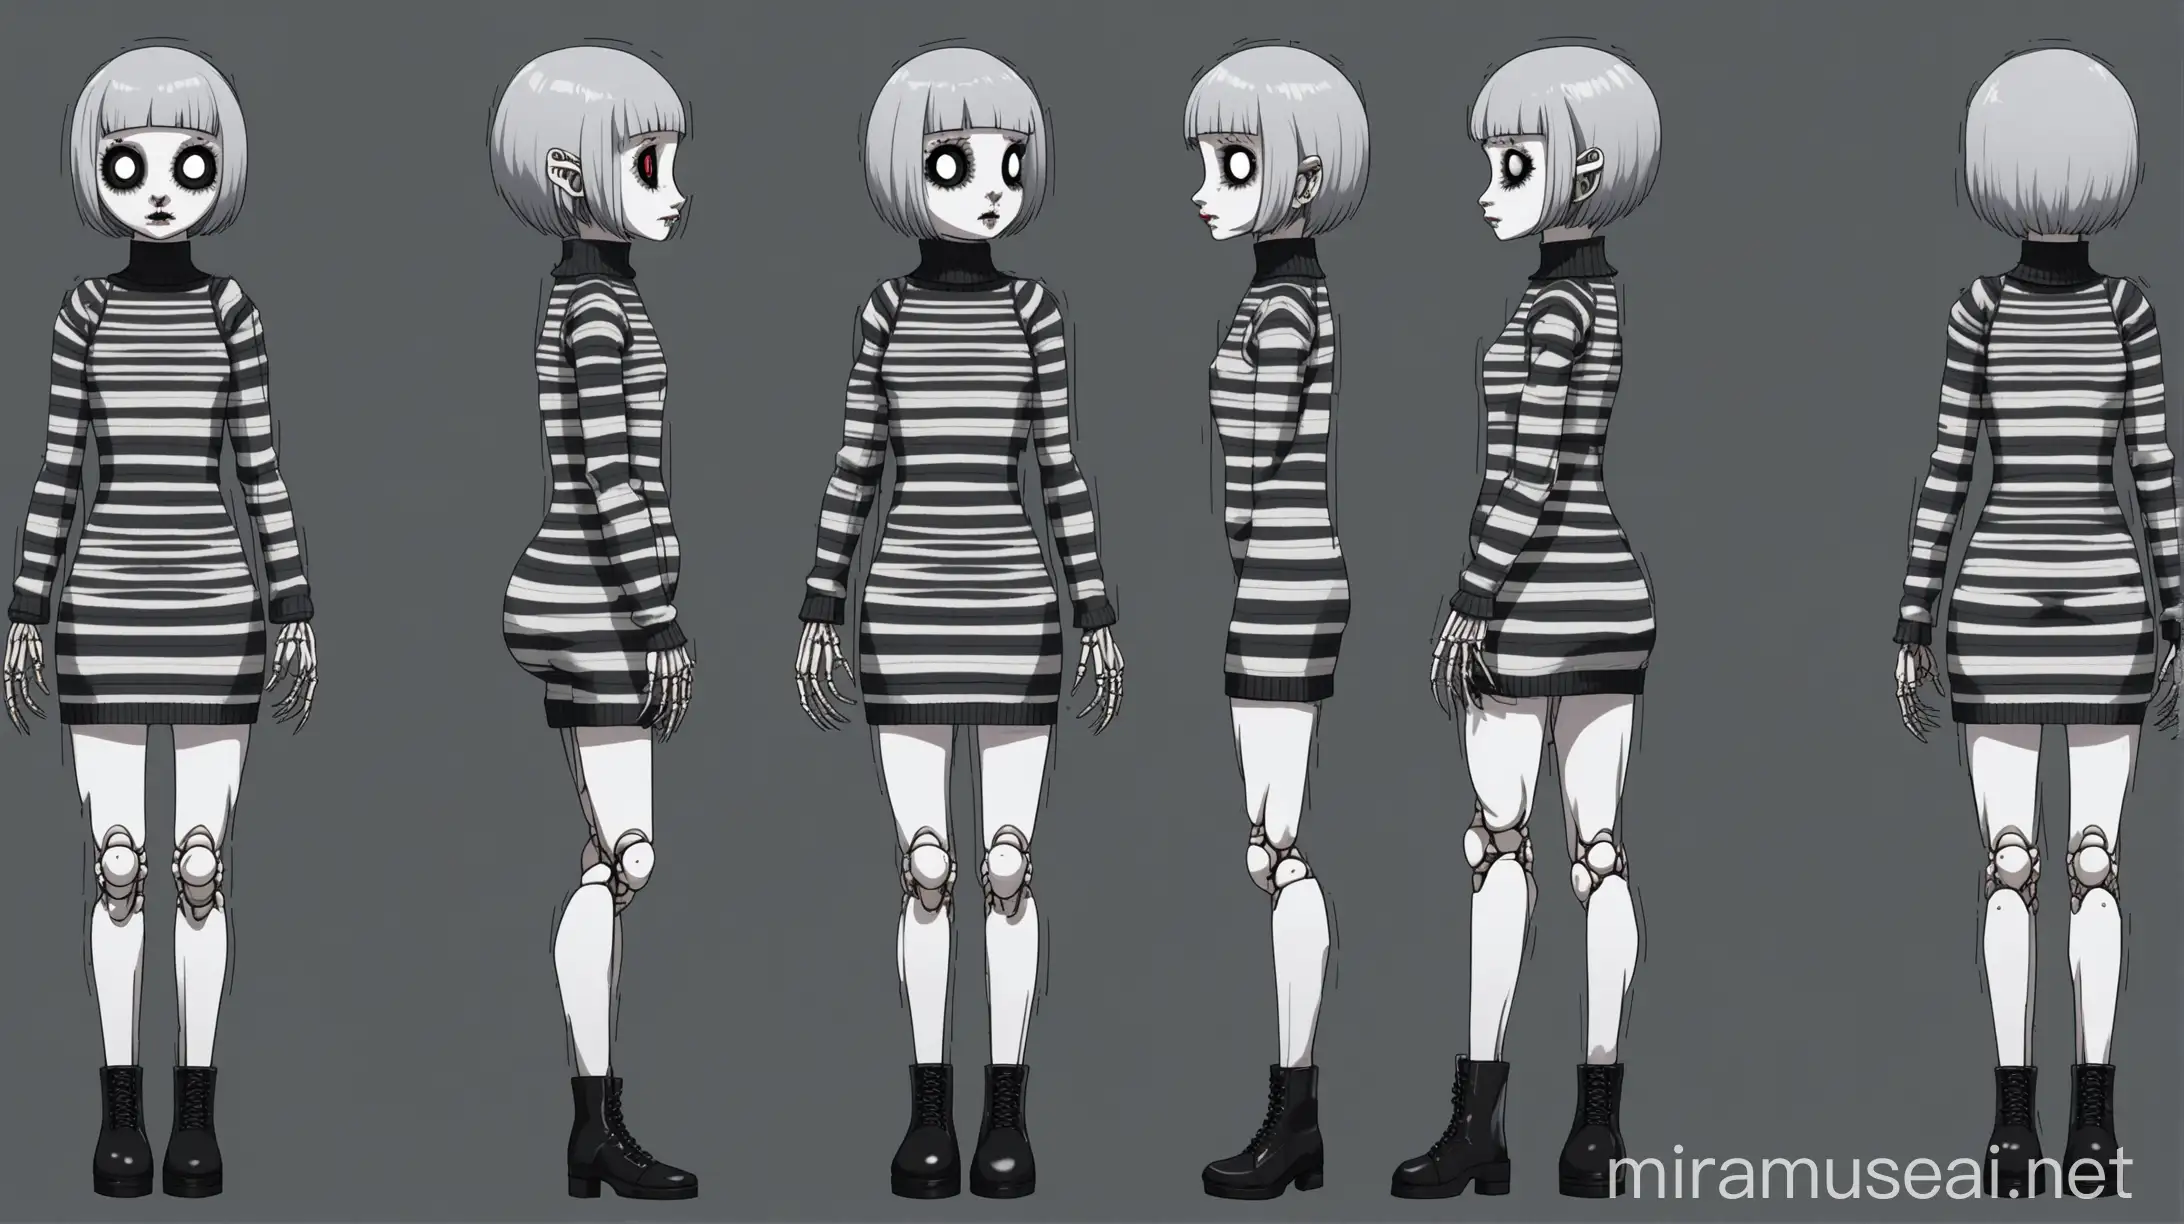 very accurate,  character reference,front view, side view, back view, facial expressions,  accurate ranfren art style, grey short hair, pale white doll like skin, cryptid, doll joints on her bodyparts, gothic style sweater dress tight with black and grey stripes.